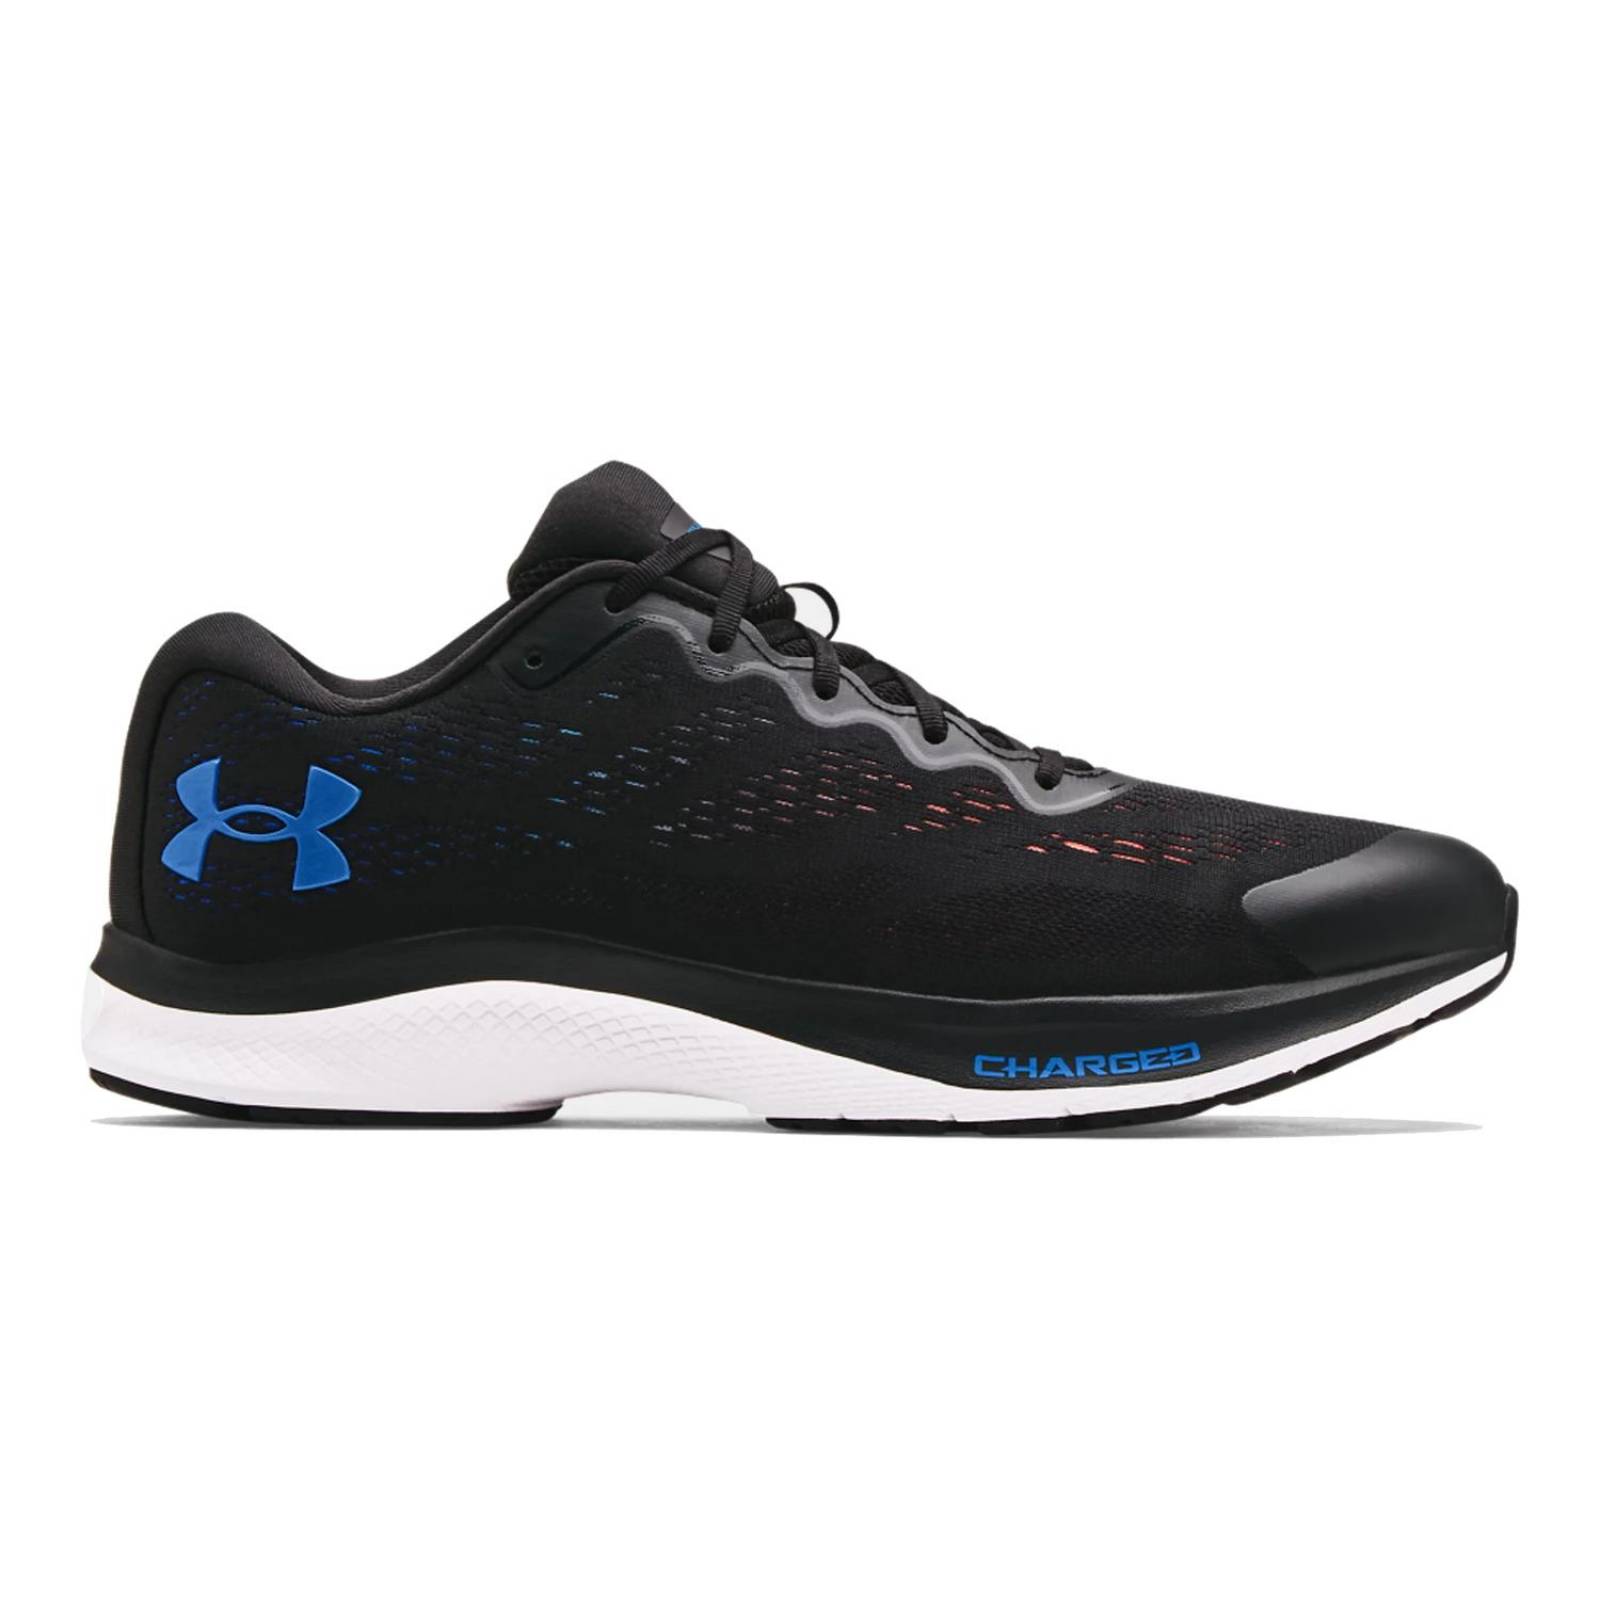 Tenis Under Armour Charged Bandit 6 Hombre Deportivo Gym Correr 